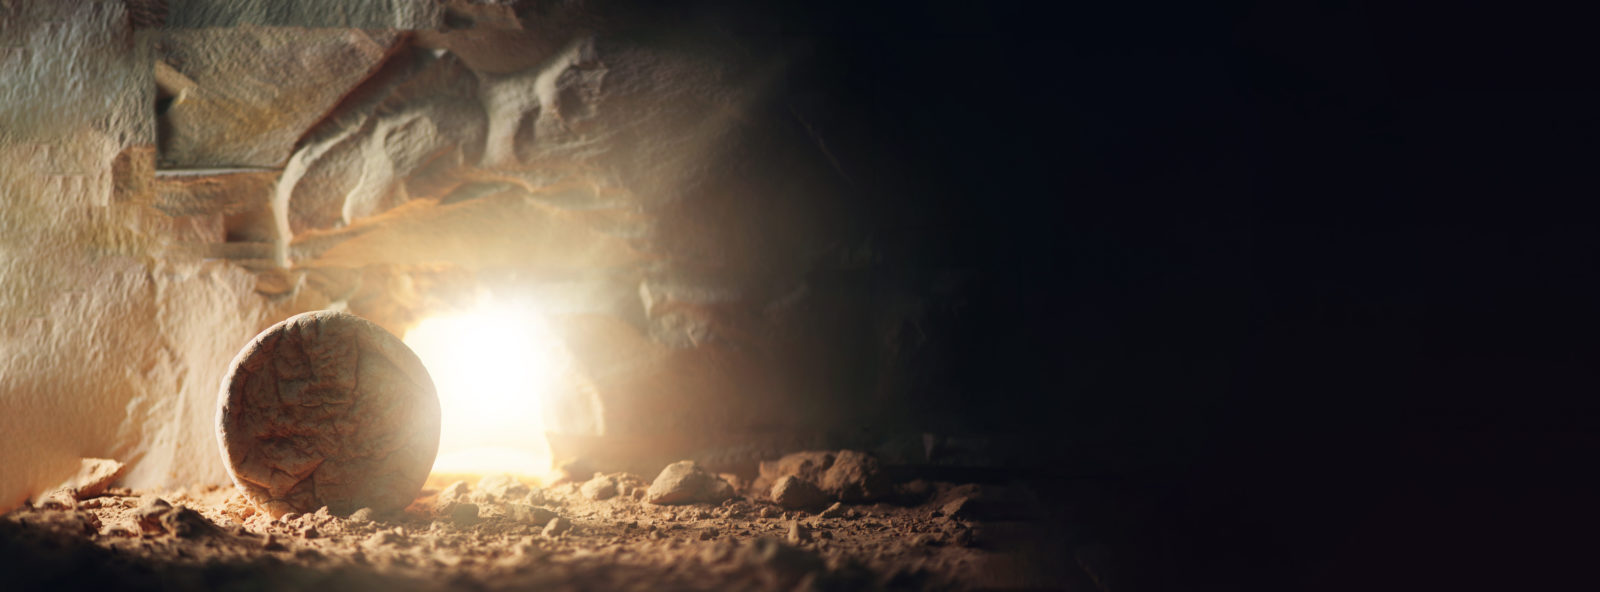 Christian Easter concept. Jesus Christ resurrection. Empty tomb of Jesus with light. Born to Die, Born to Rise. 